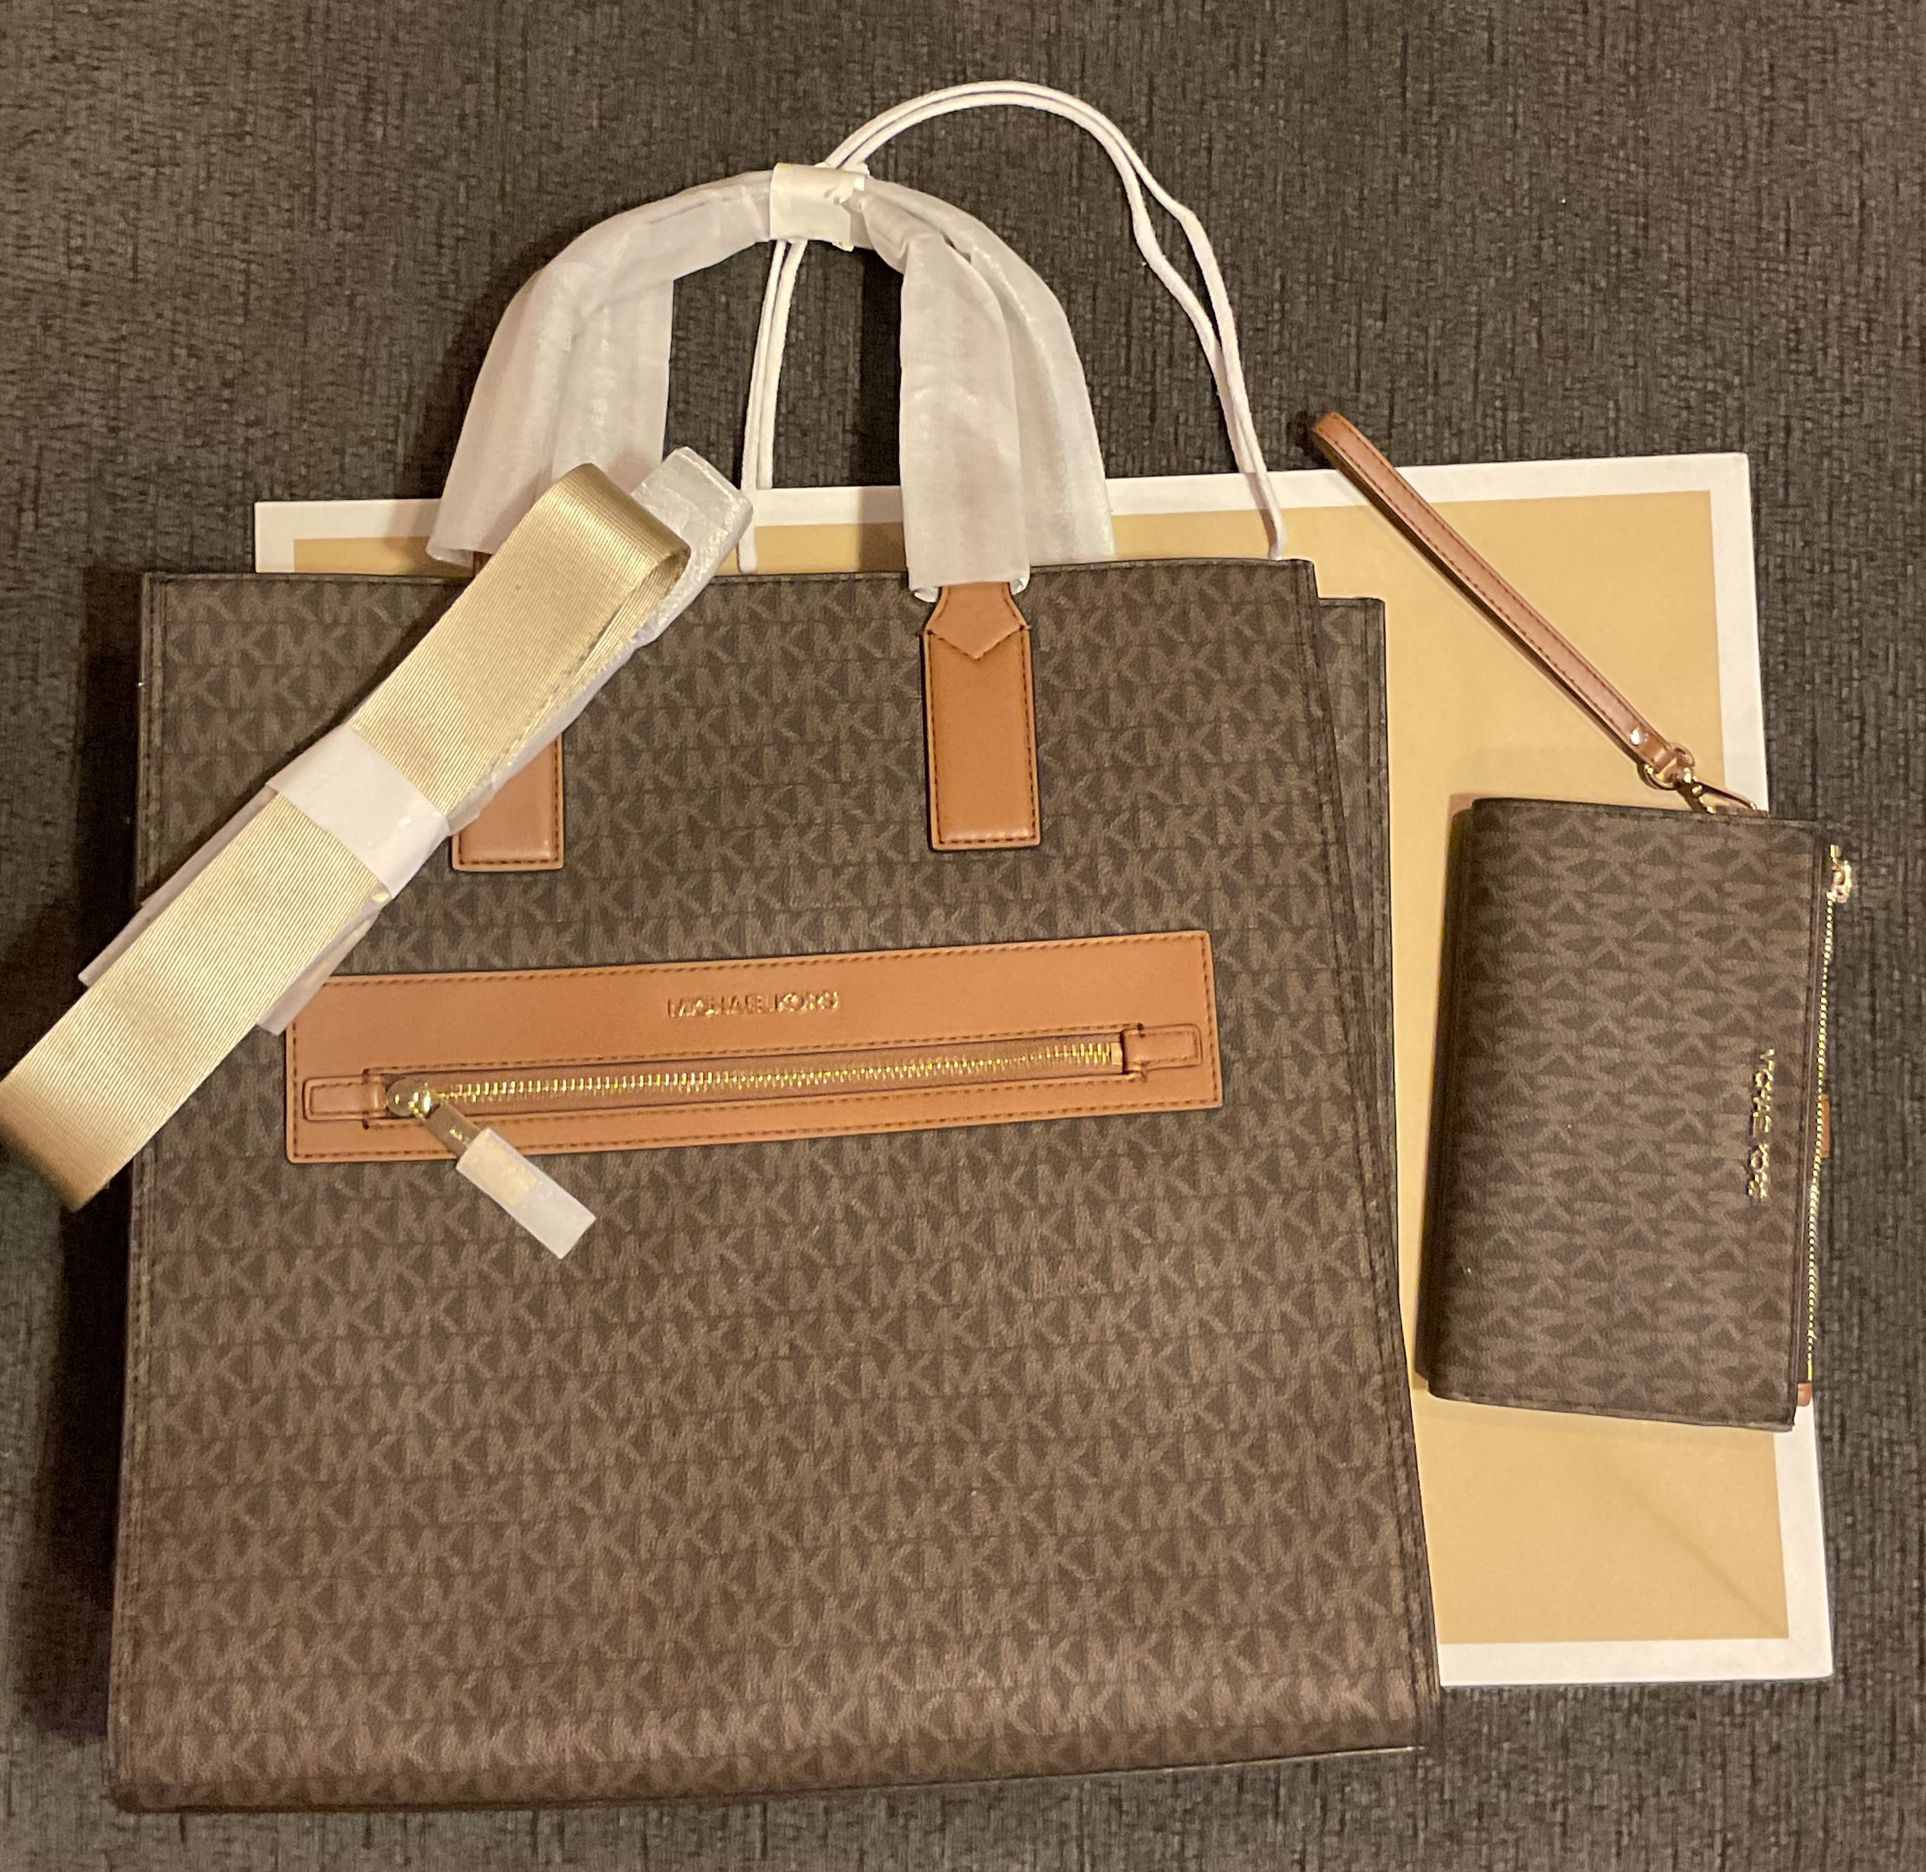 Micheal Kors Tote Bag And Wallet Combo Deal